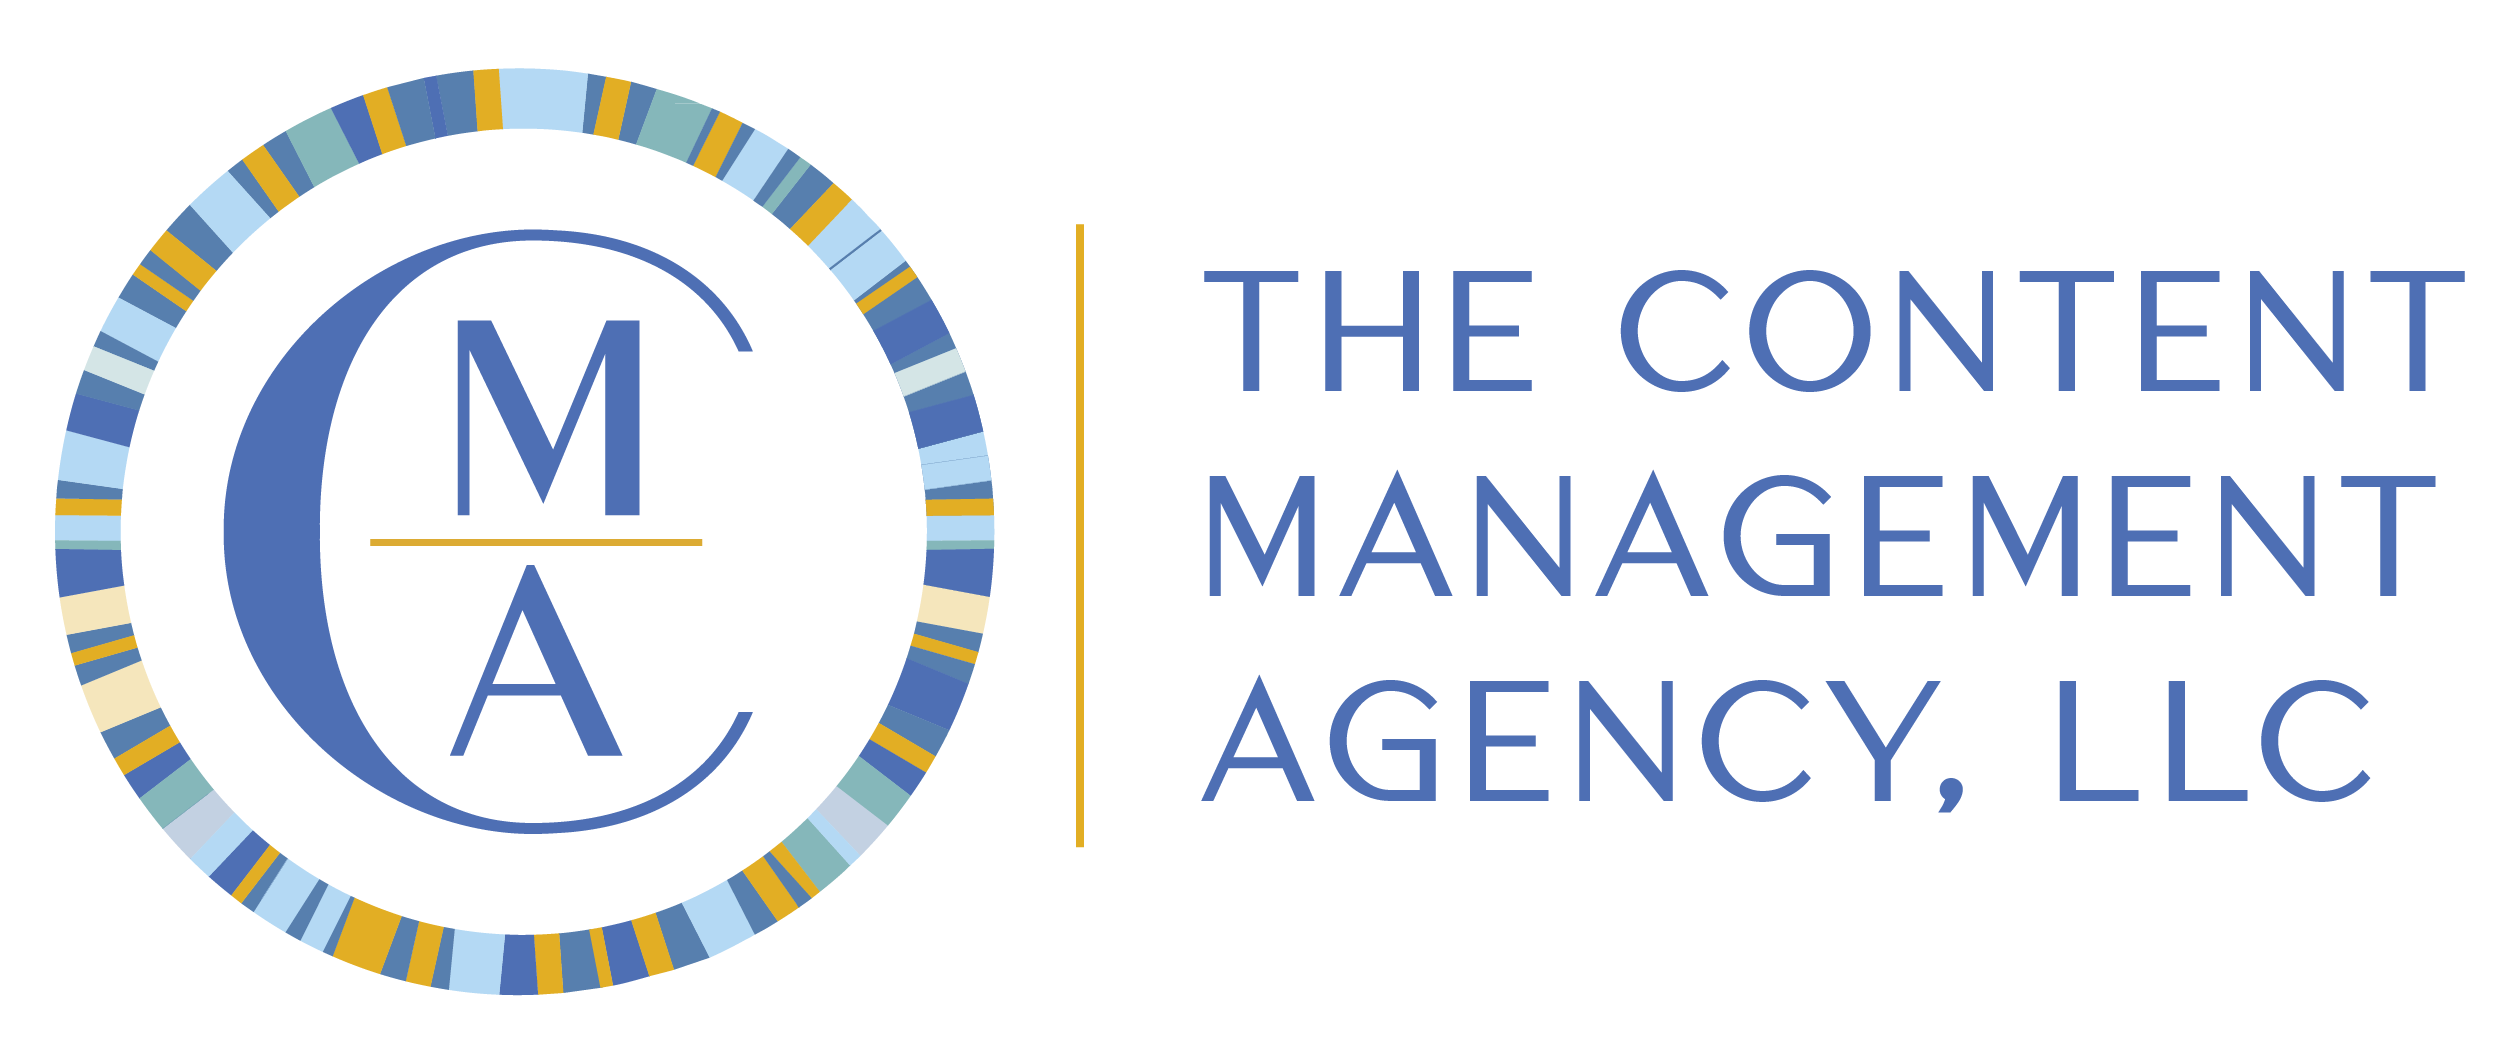 The Content Management Agency, LLC Logo